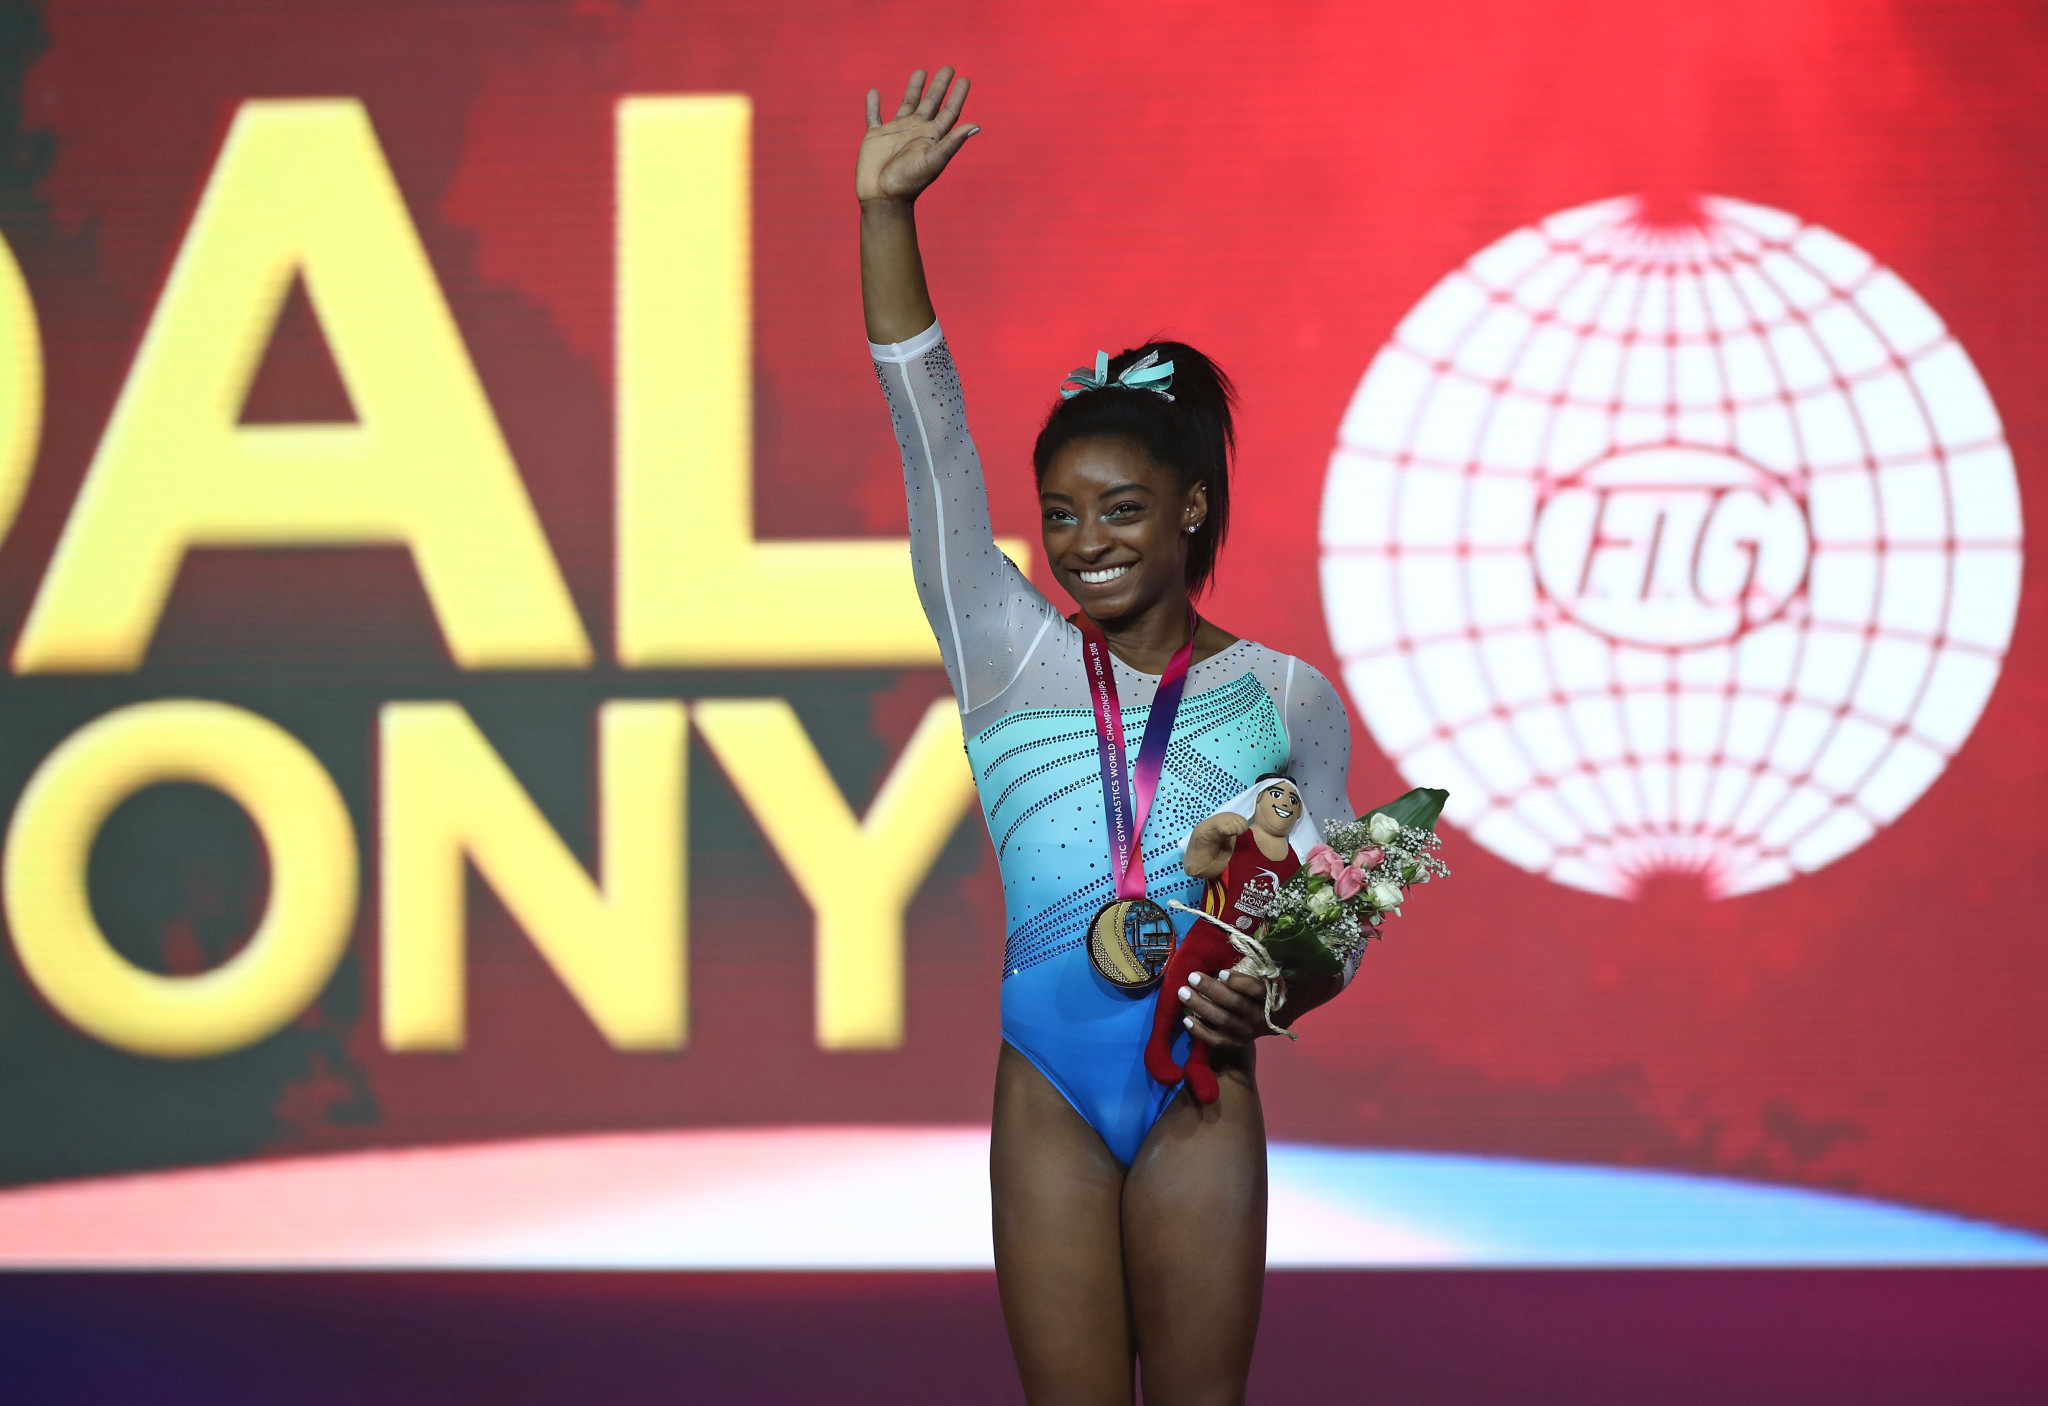 Biles makes history with fourth all-around title at Artistic Gymnastics World Championships